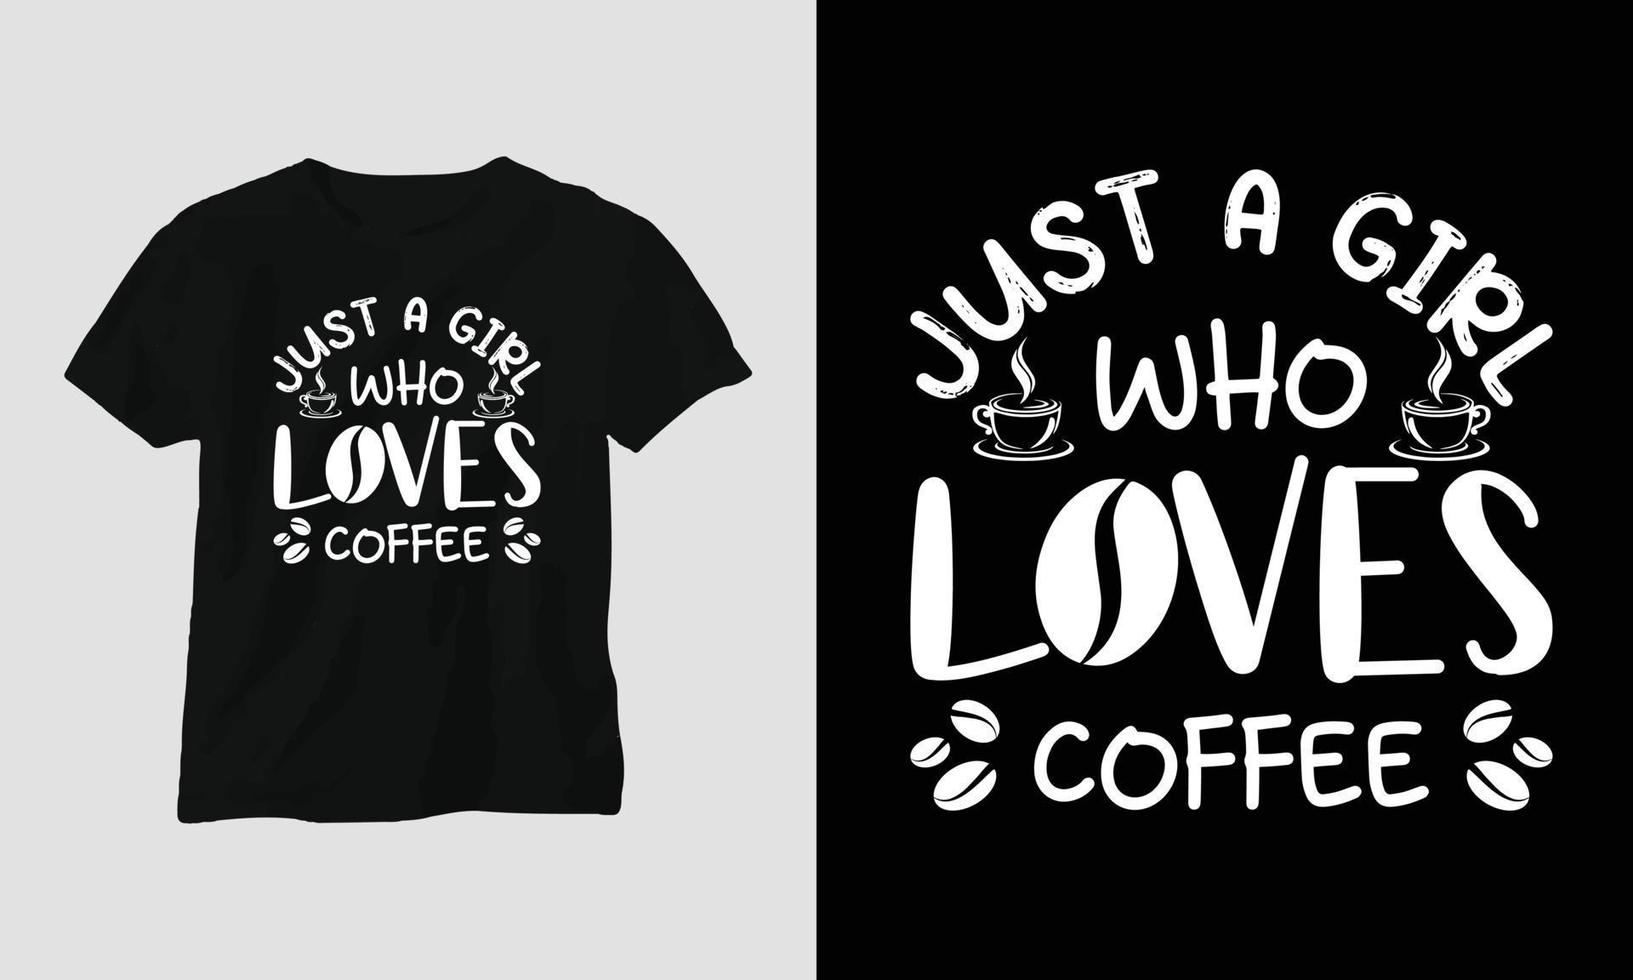 Just a girl who loves coffee - Coffee Svg Craft or Tee Design vector